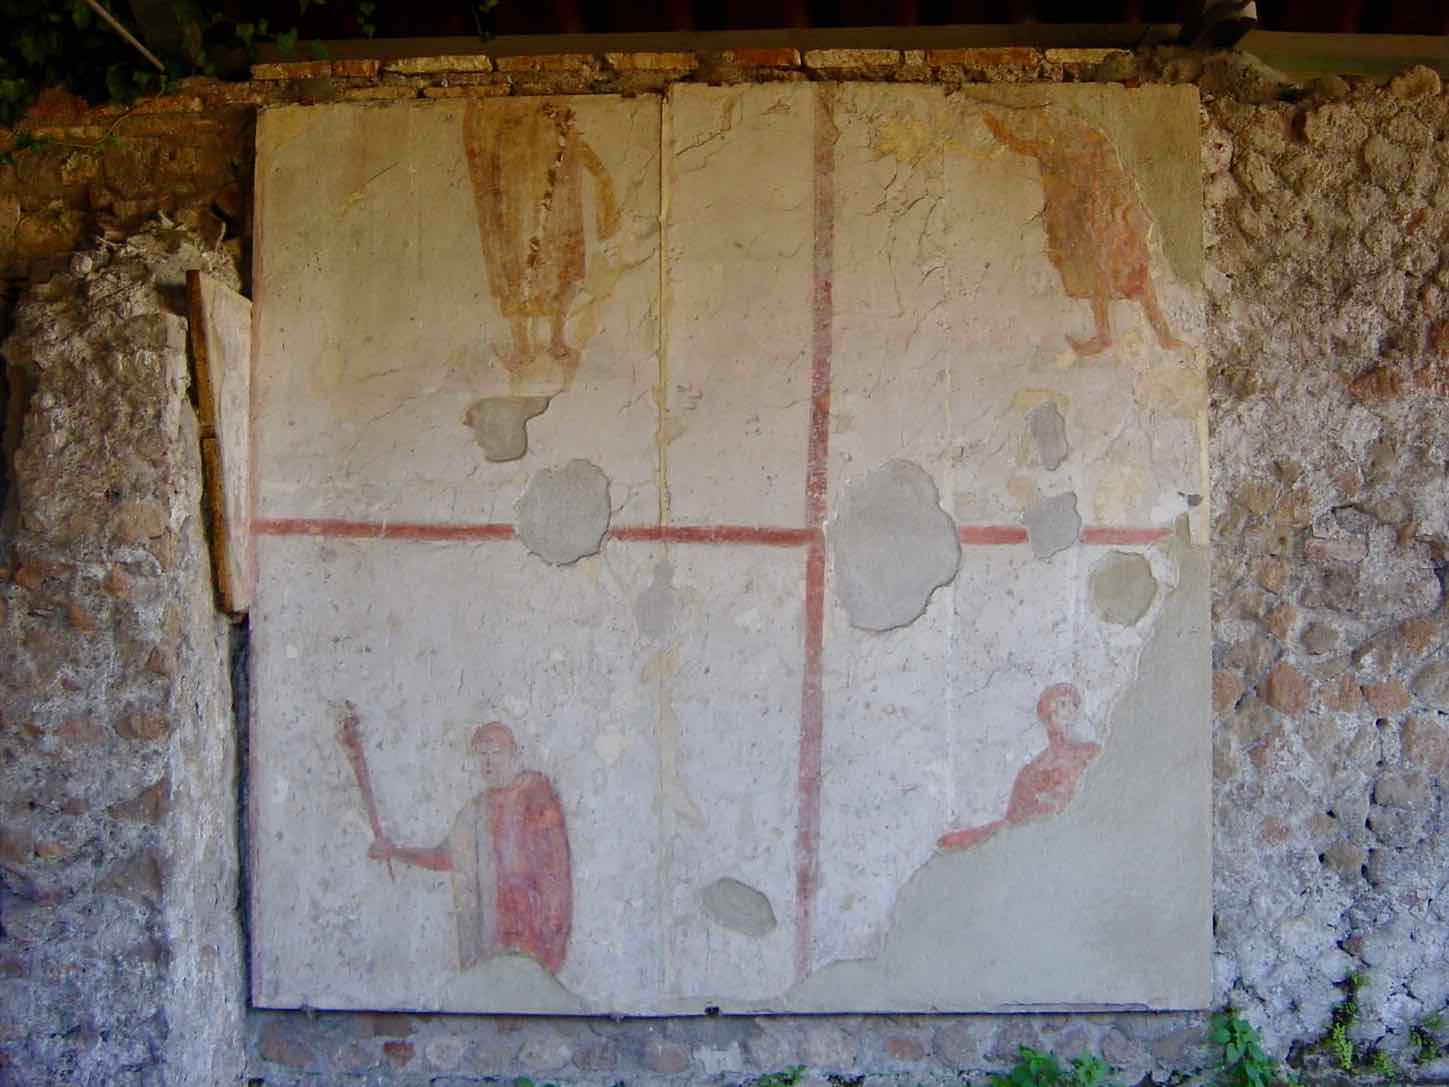 Figures on right wall, right side.